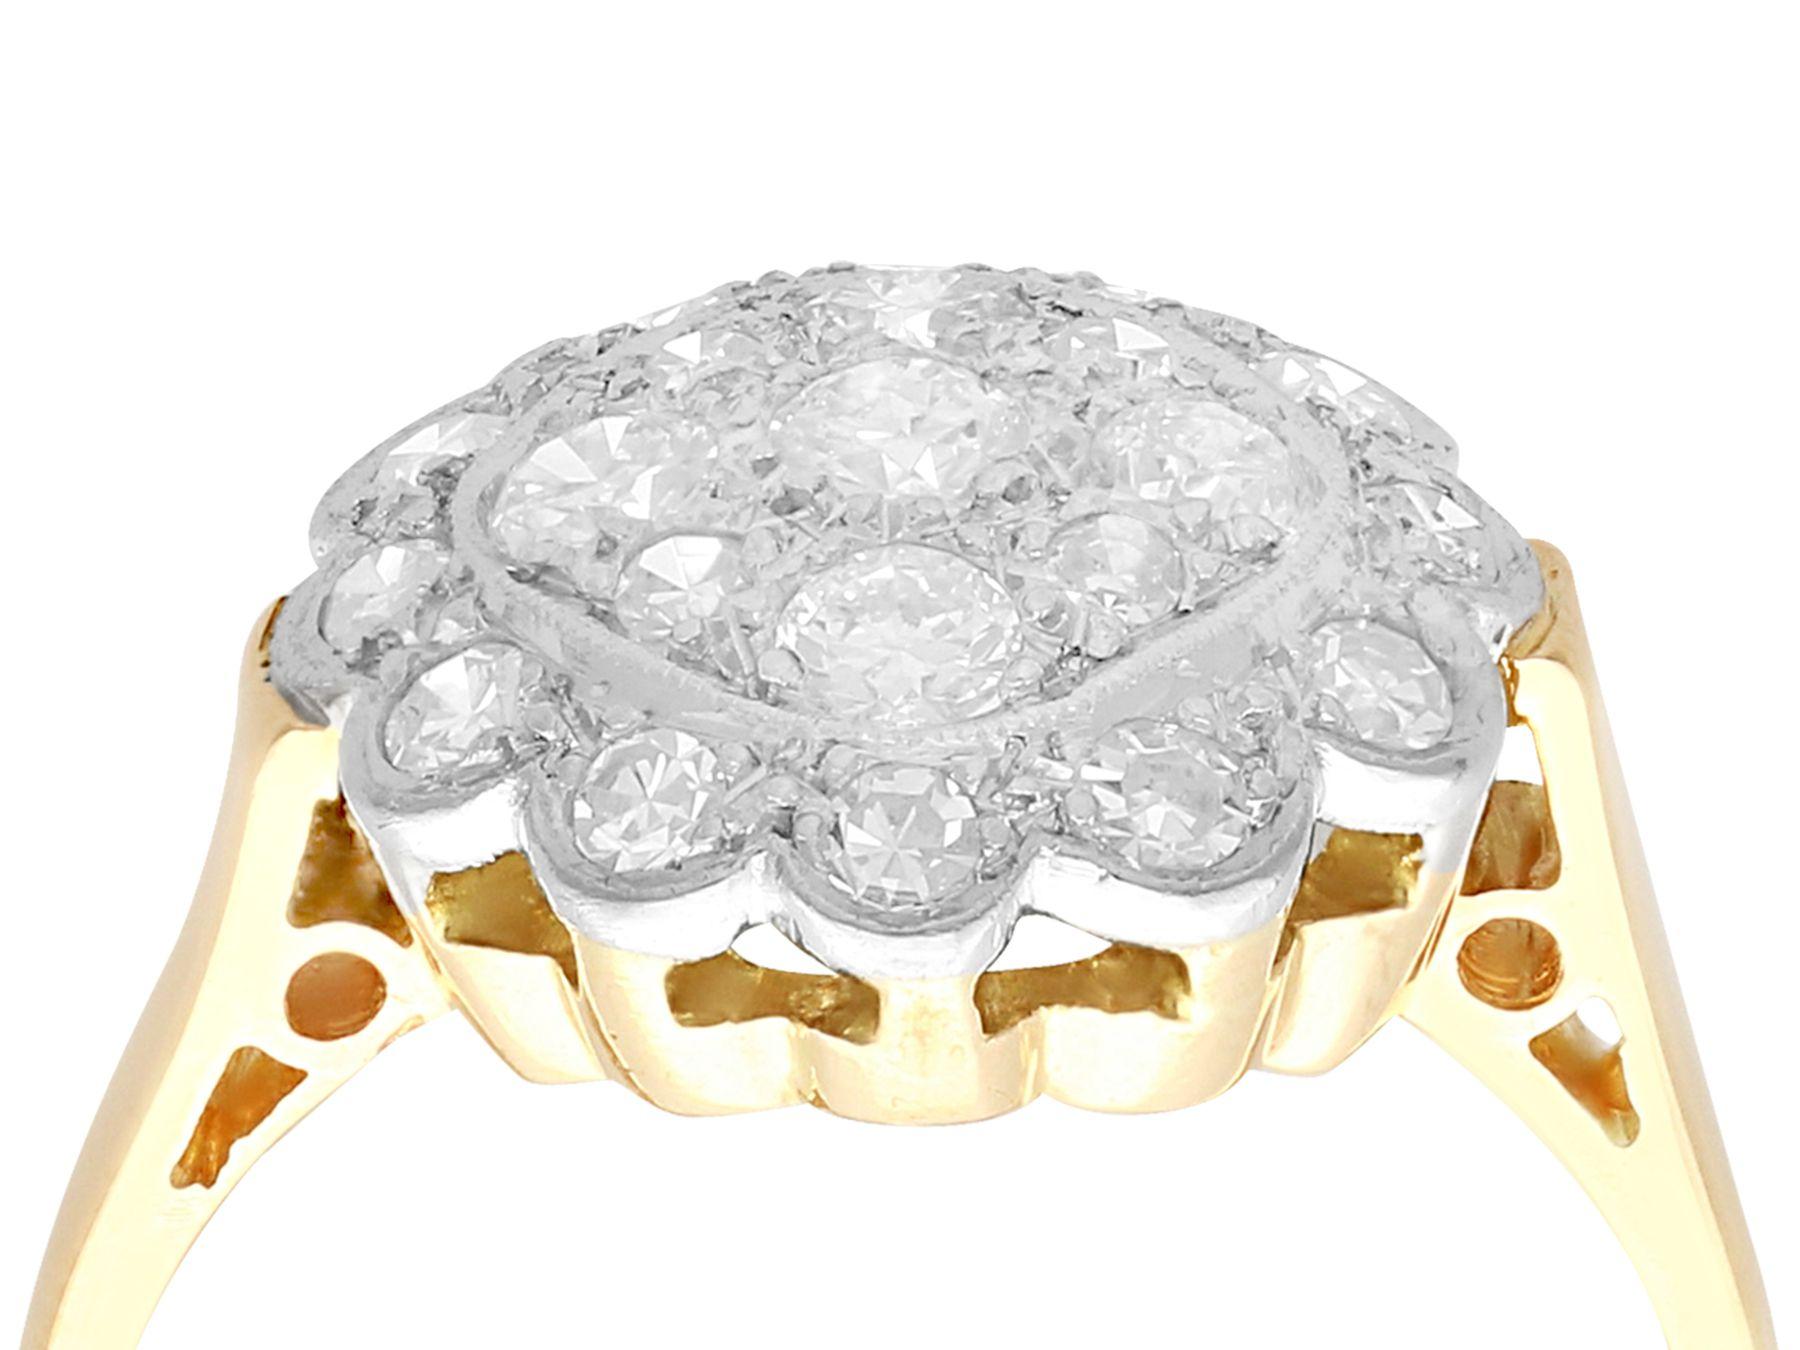 An impressive antique 1930s 0.83 carat diamond and 18 karat yellow gold, platinum set cluster ring; part of our diverse antique jewelry collections.

This fine and impressive diamond ring has been crafted in 18k yellow gold with a platinum